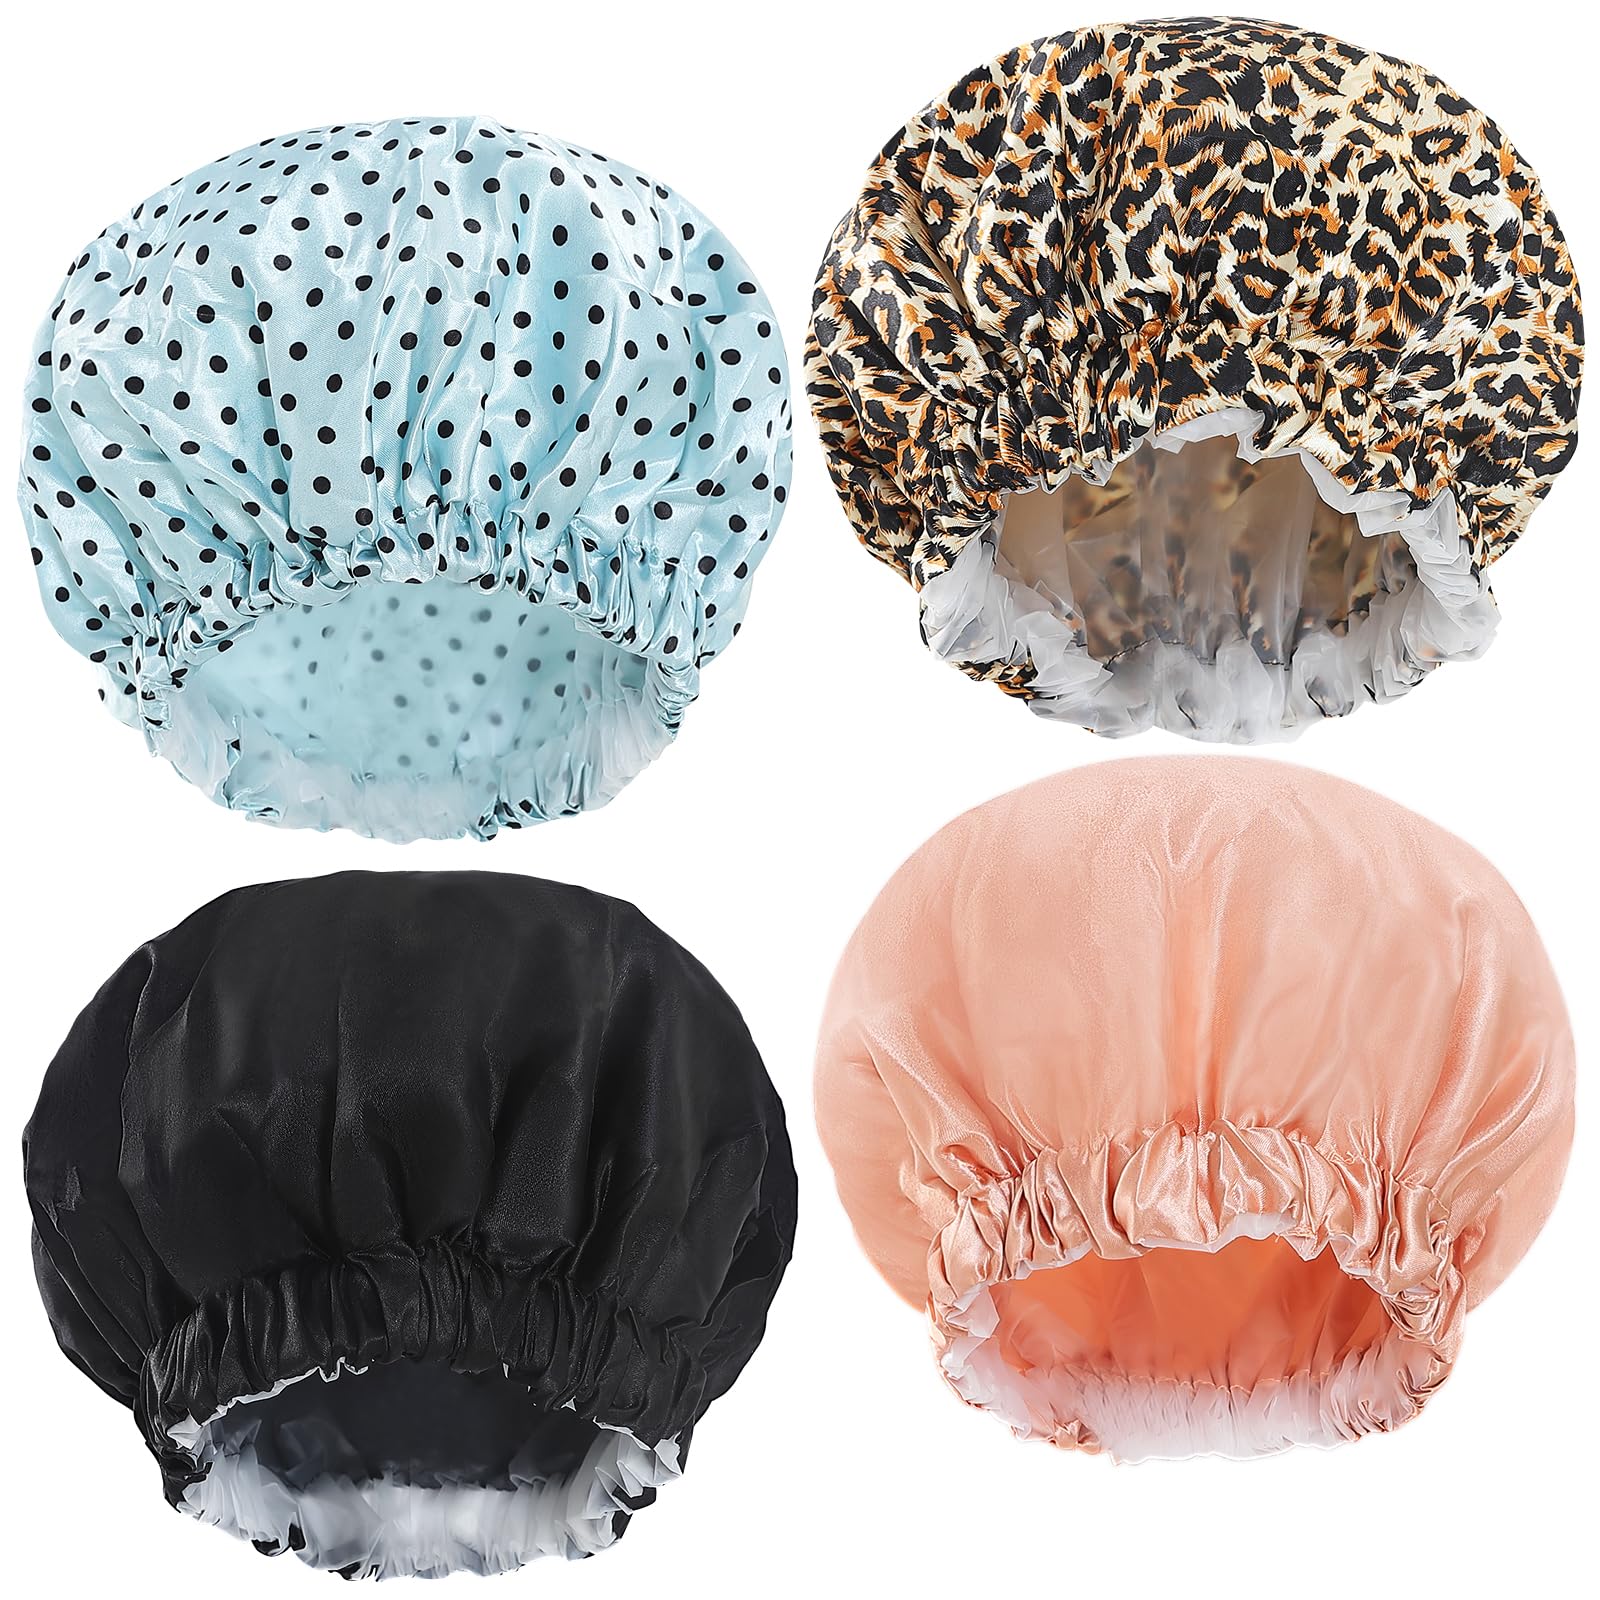 4 Pack Shower Caps for Women Reusable Waterproof, Double Protection Layer Satin shower Cap, Eco-Friendly Elastic Bath Hair Cap for Shower with a Toiletry Bag